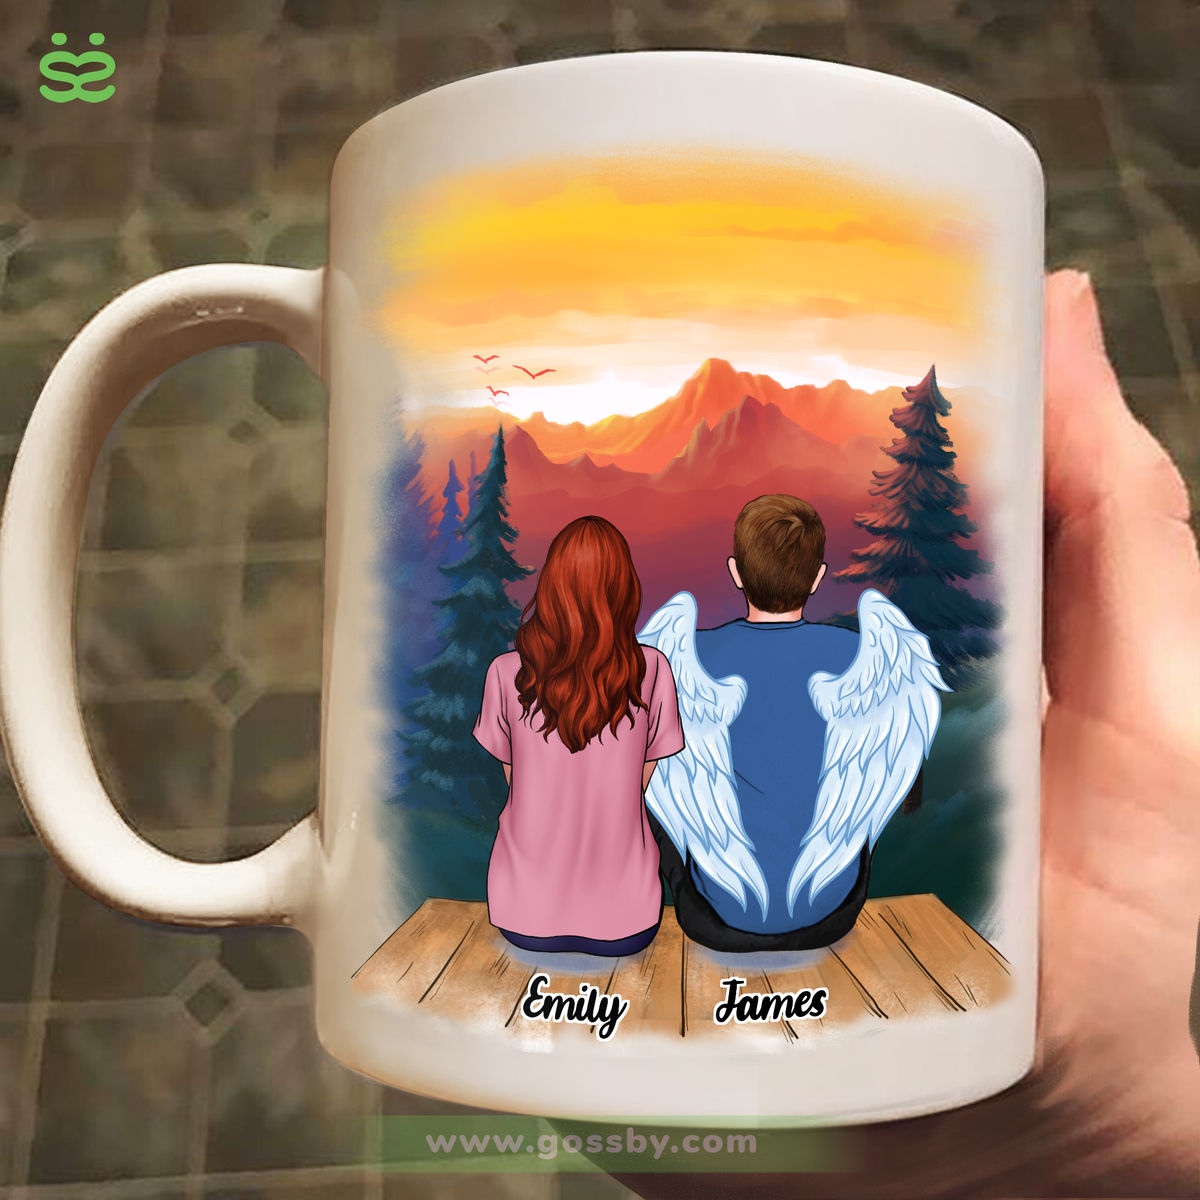 Personalized Mug - Family Memorial - I am always with you  (11694)_1